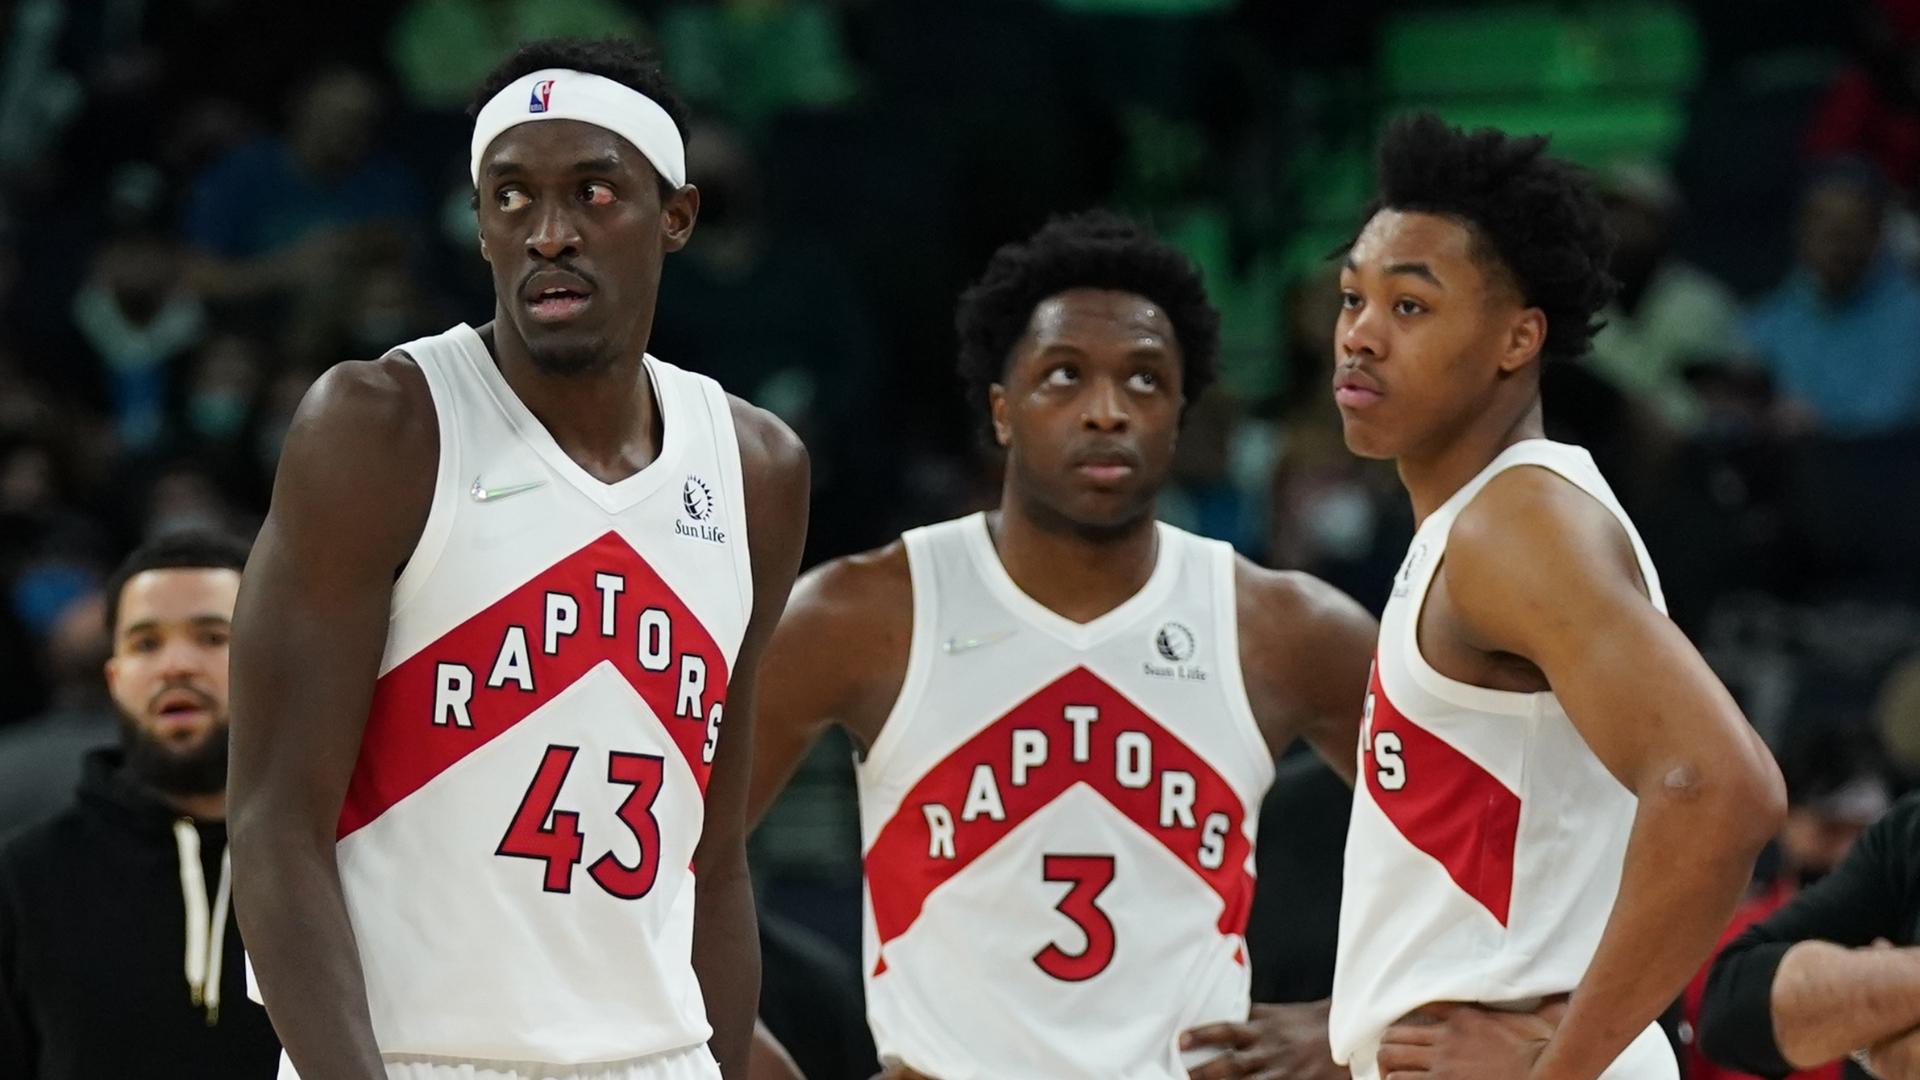 The Raptors laid out their blueprint for survival after Siakam’s injury